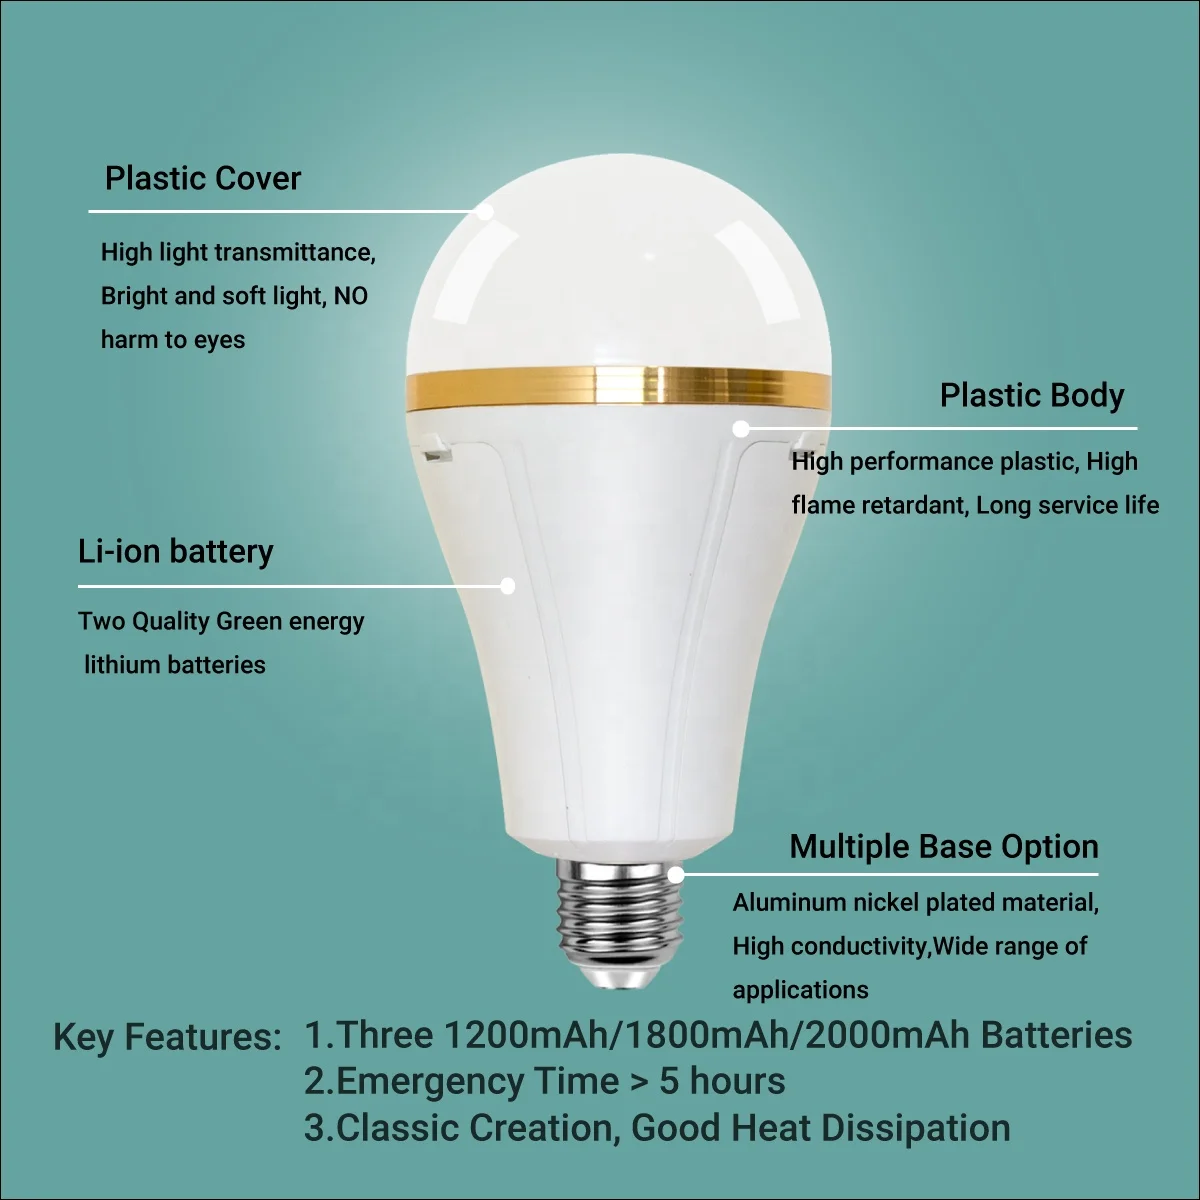 LED 7W Warm White Magic Bulb with Remote Controller and Rechargeable  Lithium Built-in Battery E26 Lamp for Home Power Outages Lighting for  Emergency Bulb - China LED Emergency Bulb, LED Magic Bulb